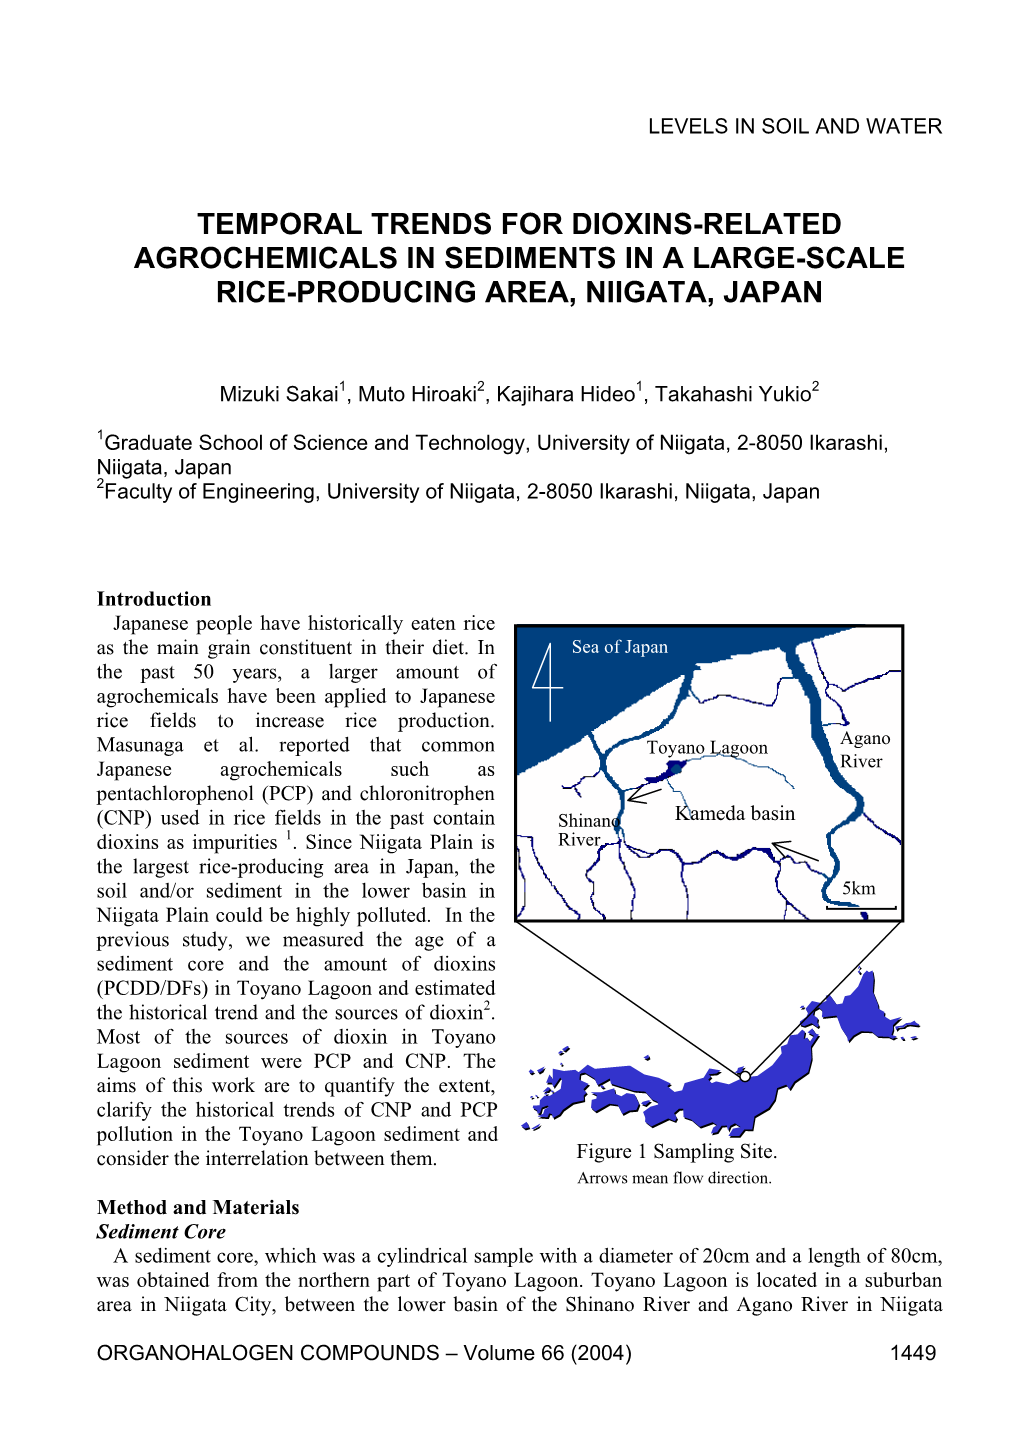 Temporal Trends for Dioxins-Related Agrochemicals in Sediments in a Large-Scale Rice-Producing Area, Niigata, Japan